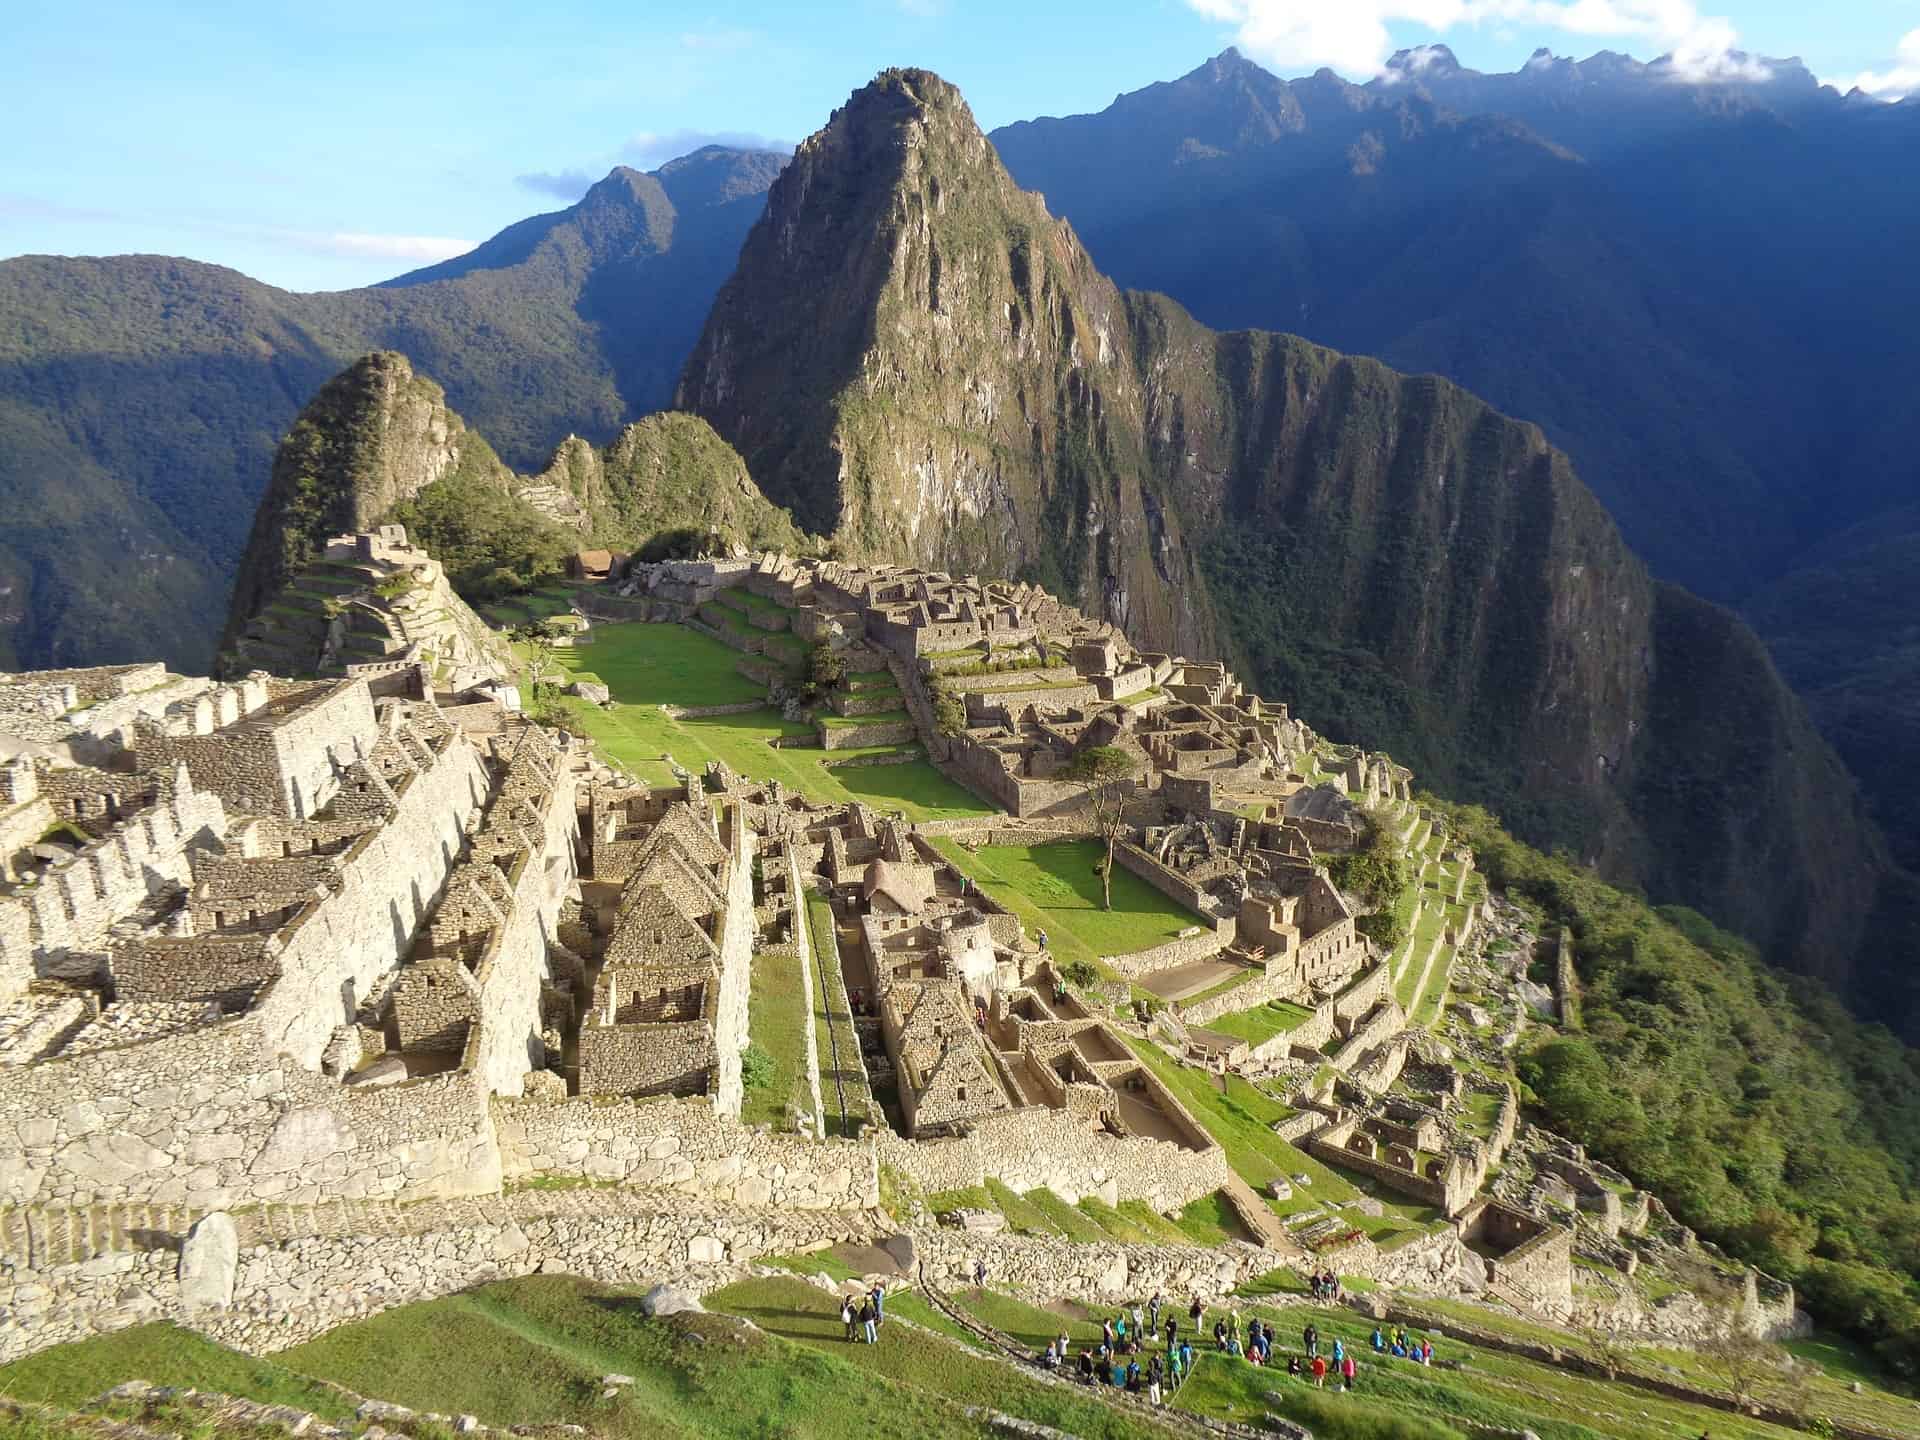 Bucket list for families - Machu Picchu overall view in the Andes